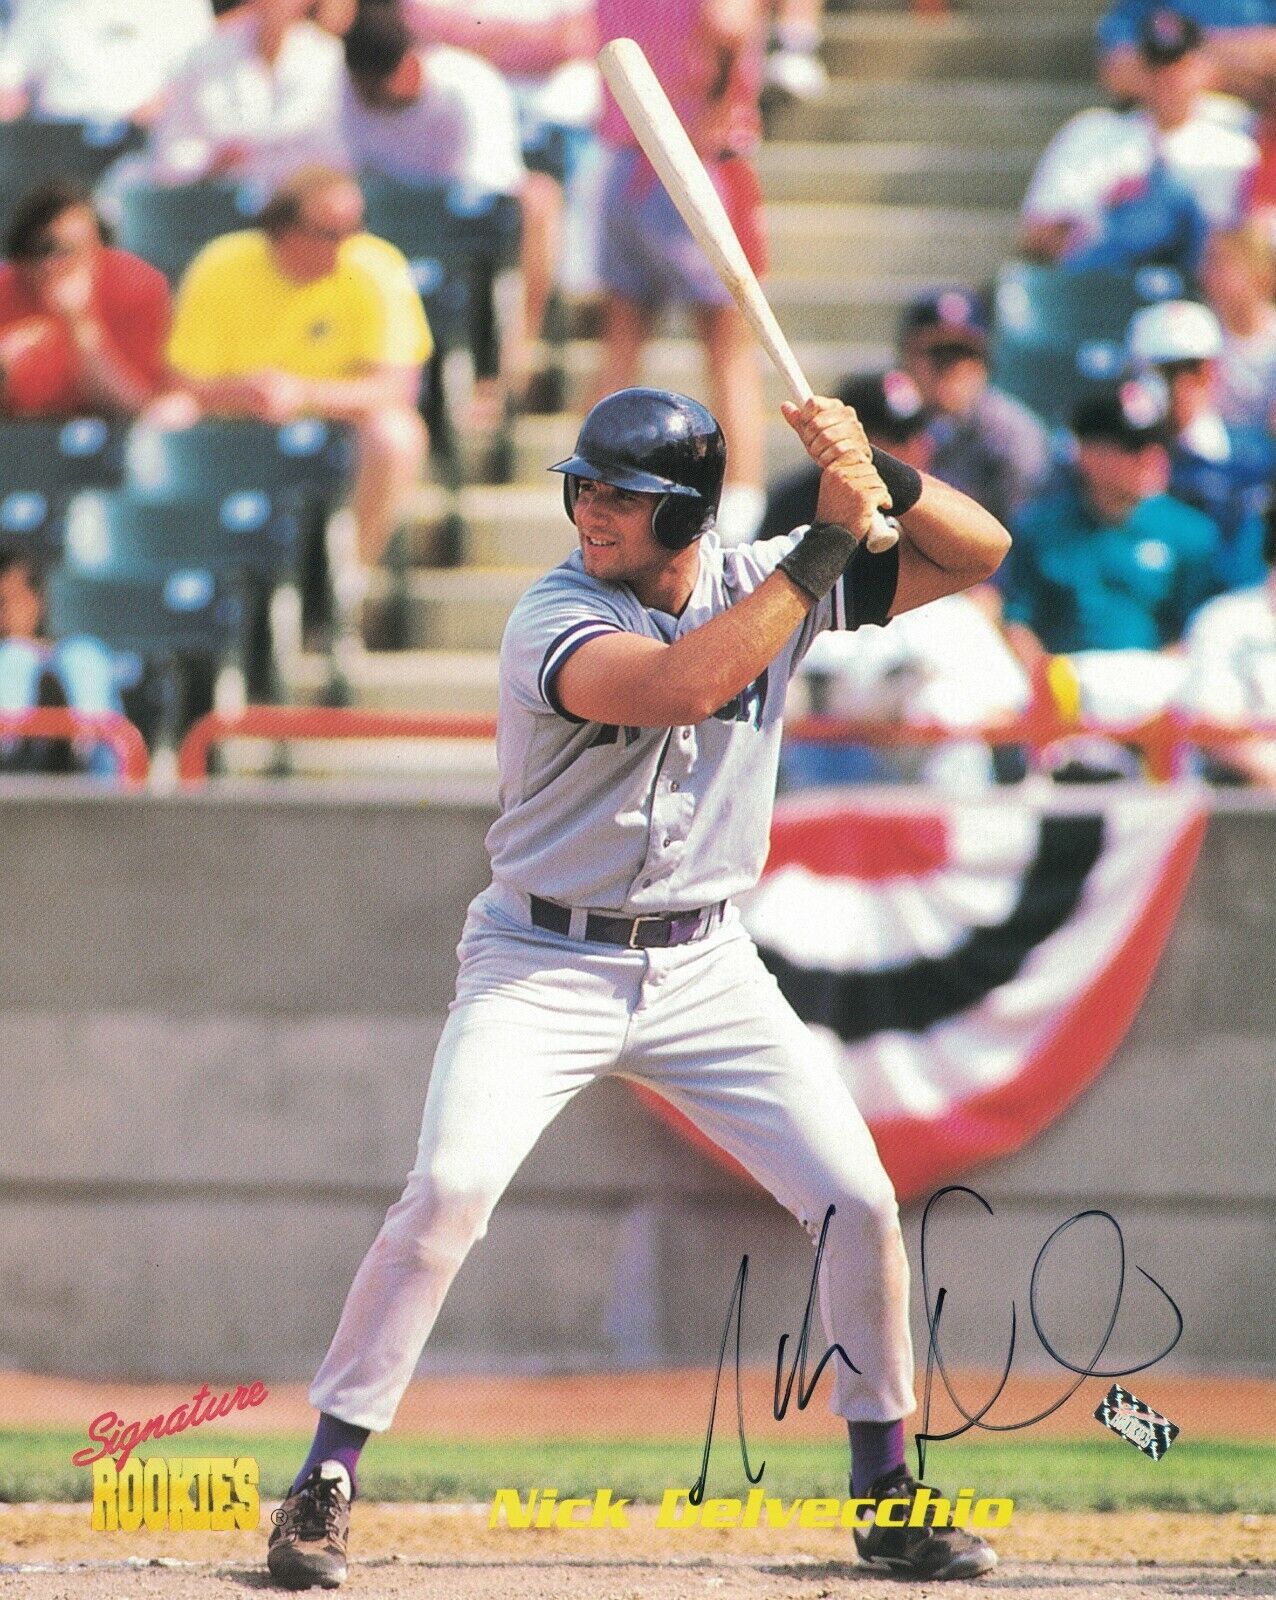 Nick Delvecchio Signed Autographed 8x10 Photo Poster painting Yankees Signature Rookies